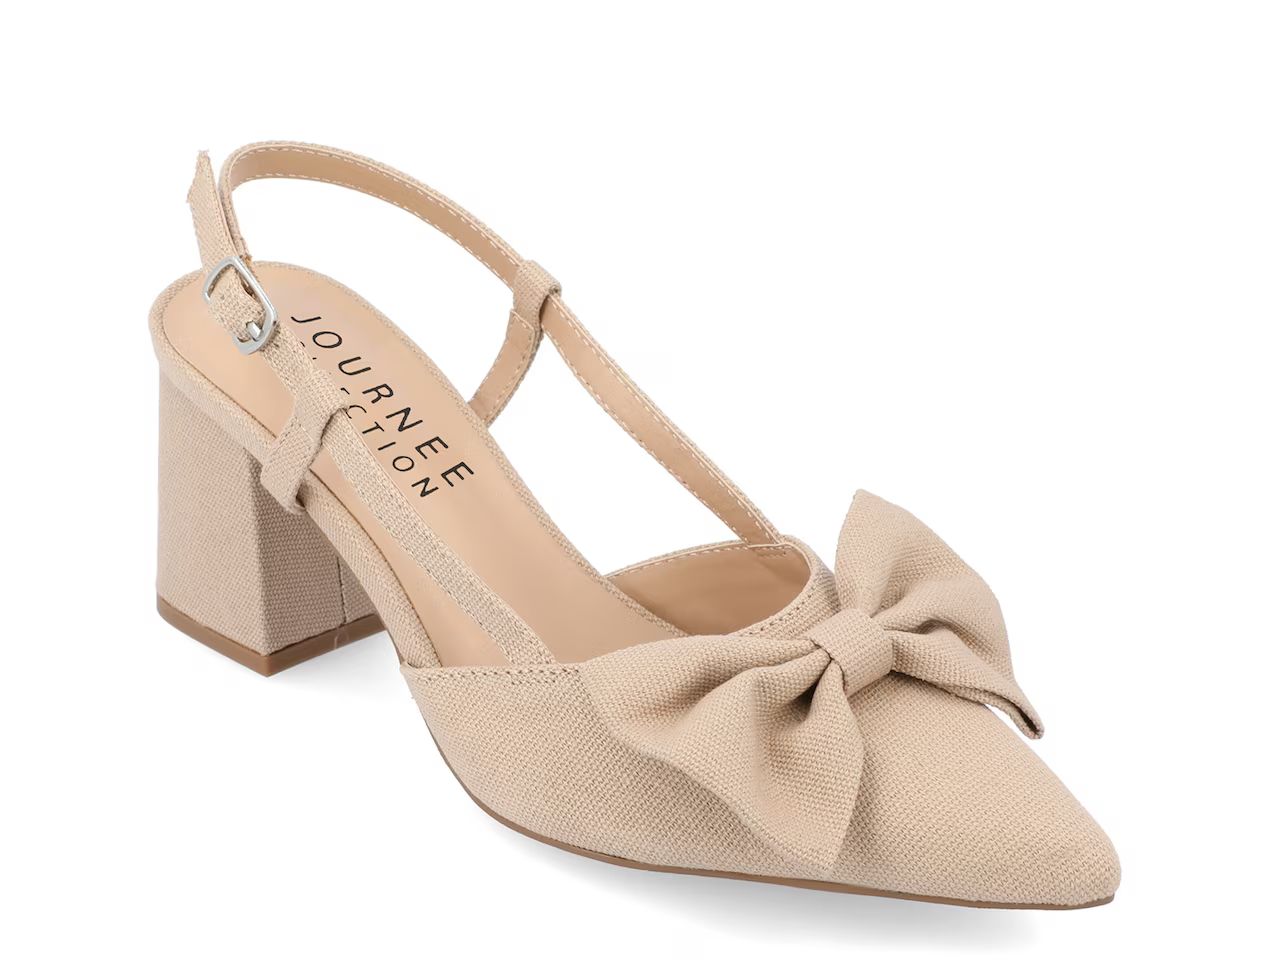 Journee Collection Tailynn Pump | DSW